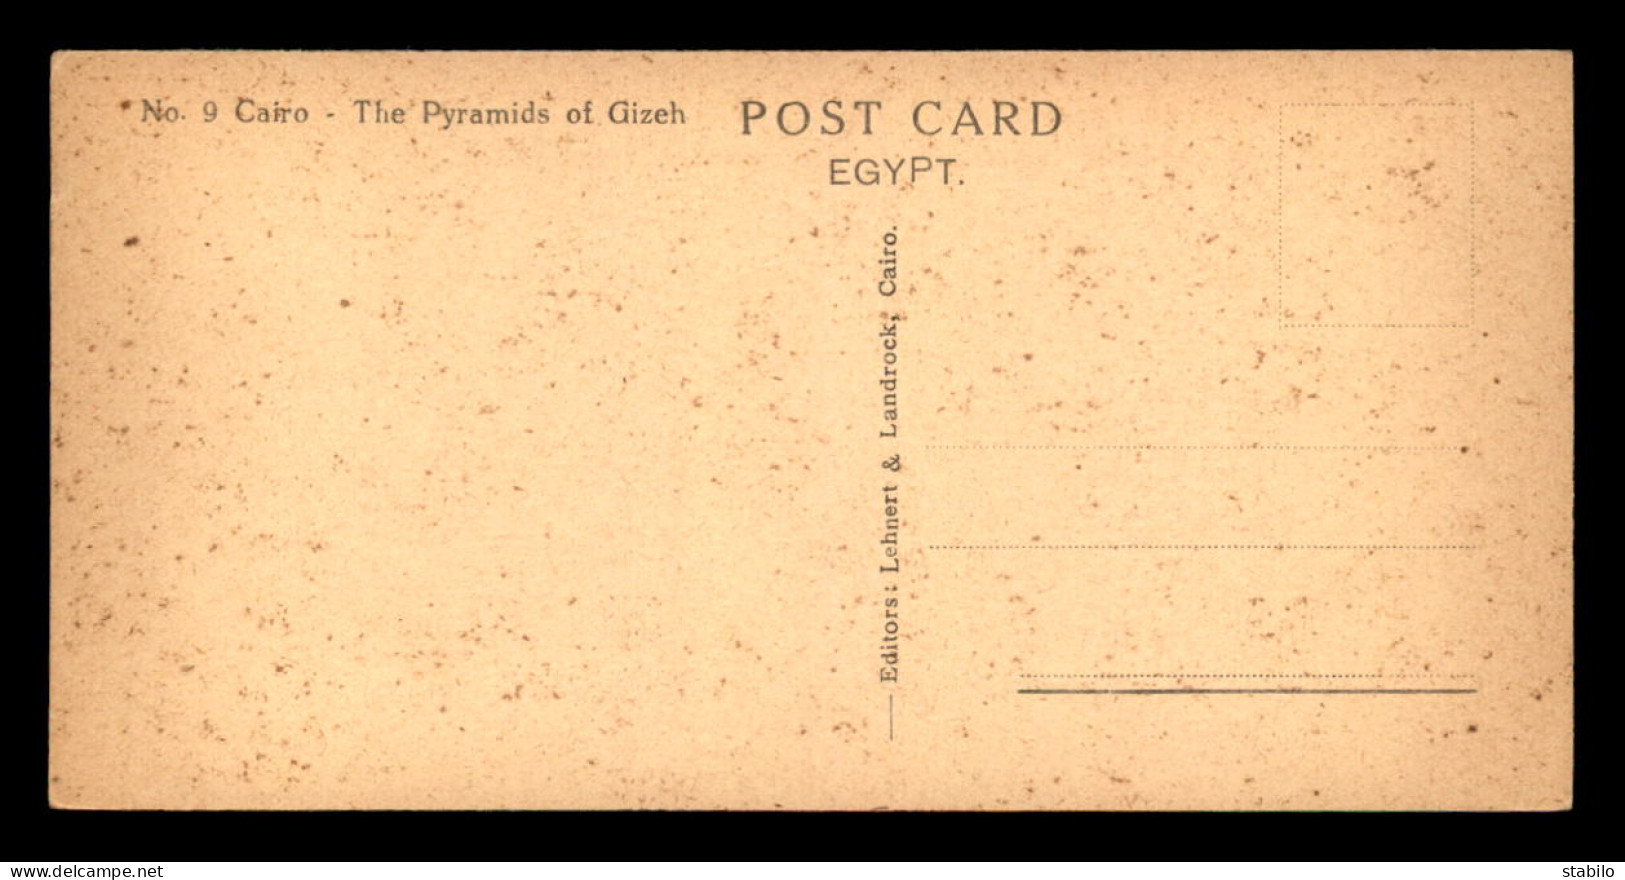 EGYPTE - LENHERT & LANDROCK N° 9 - CAIRO - THE PYRAMIDS OF GIZEH - FORMAT 15 X 7.5 CM - Le Caire